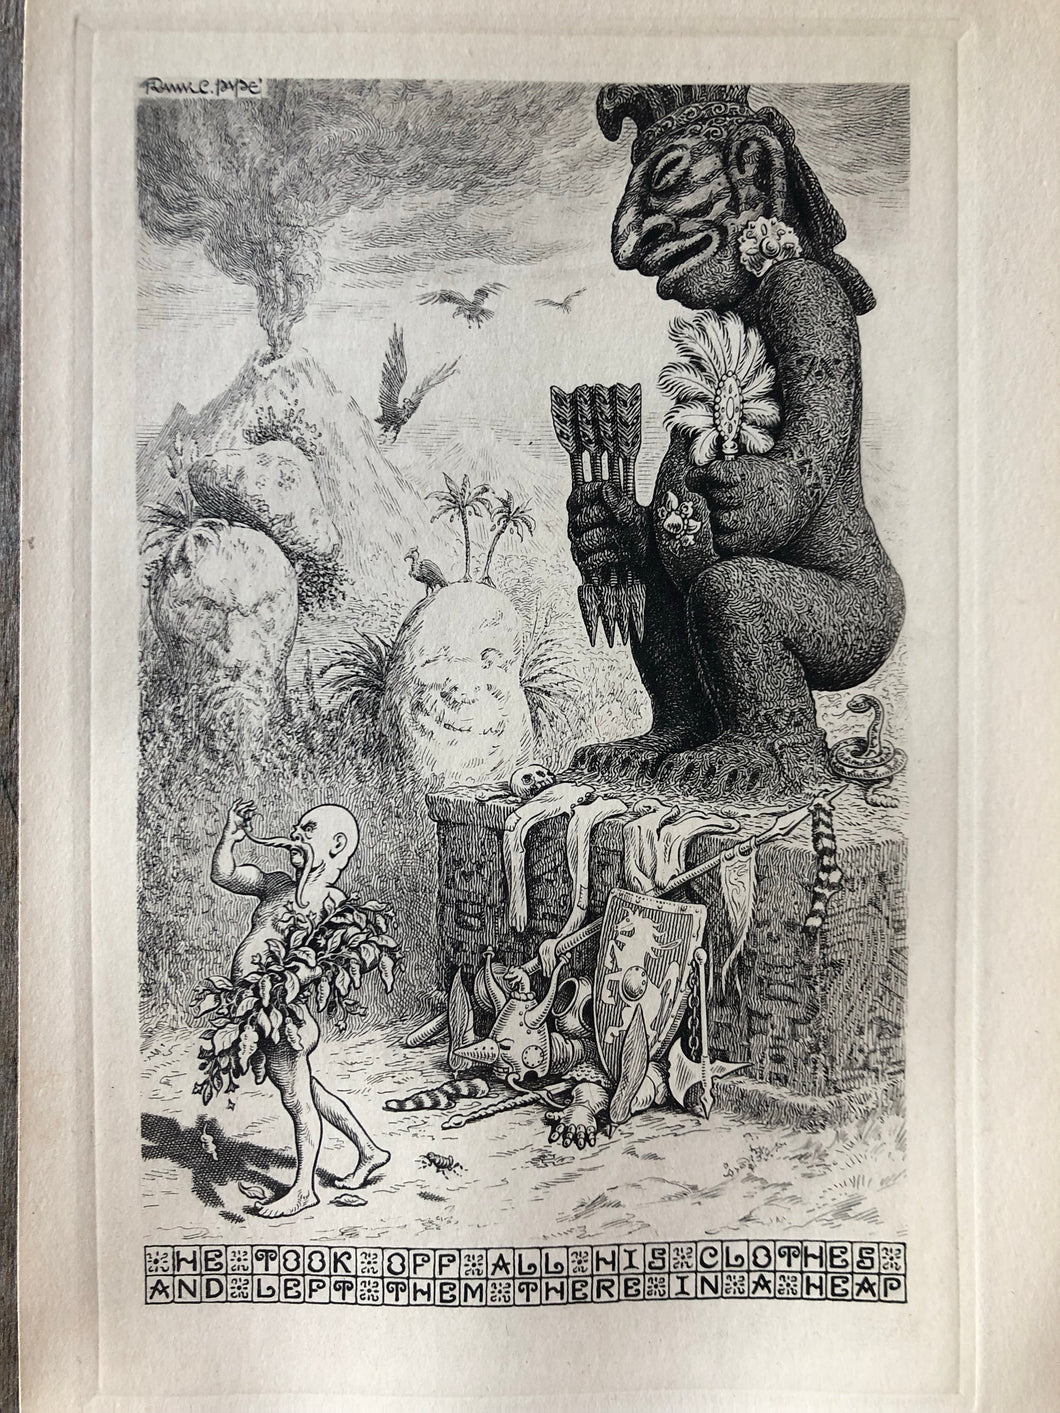 Print by Frank C. Pape from The Silver Stallion: A Comedy of Redemption by James Branch Cabell